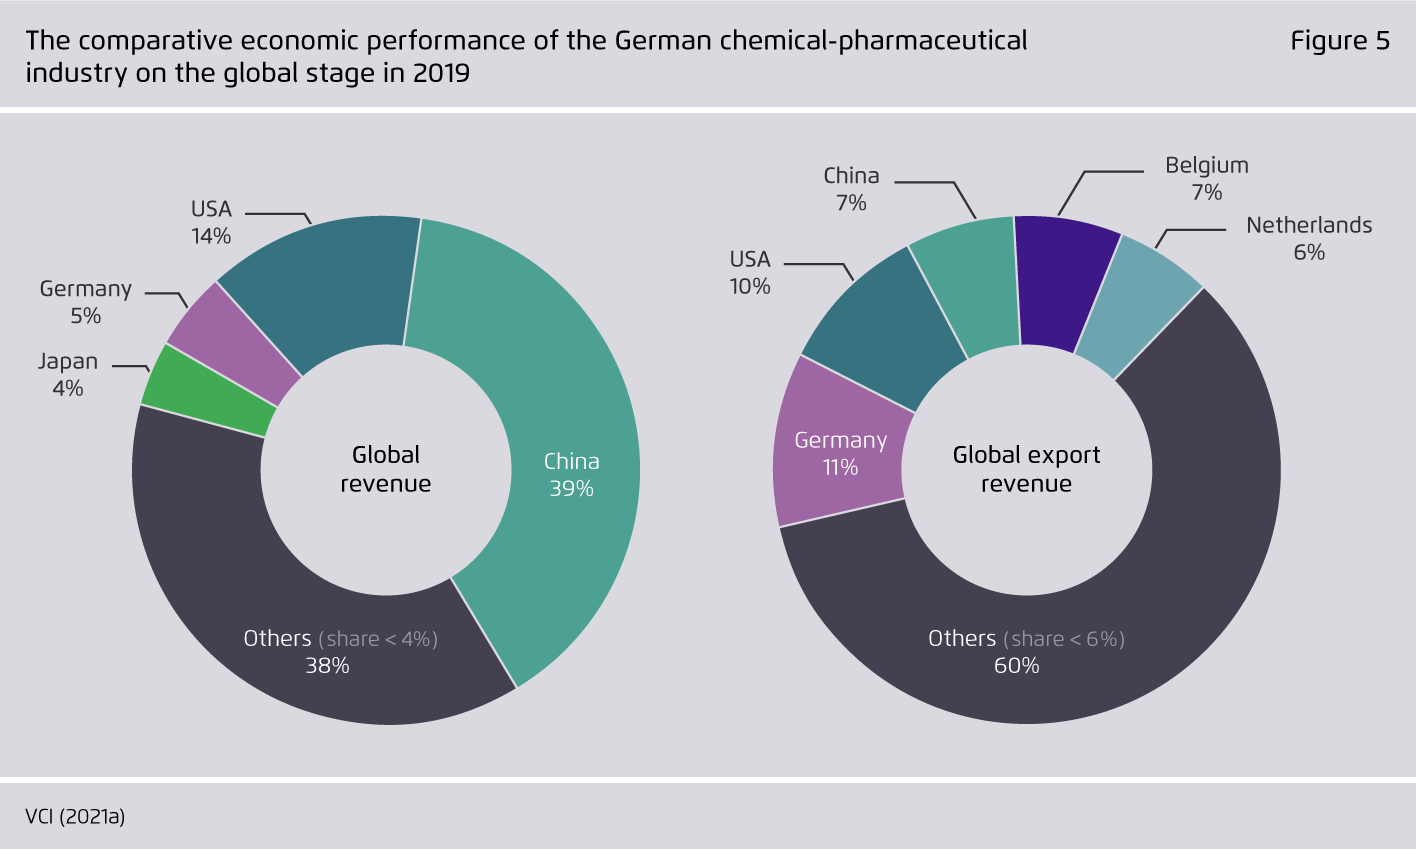 Preview for The comparative economic performance of the German chemical-pharmaceutical industry on the global stage in 2019